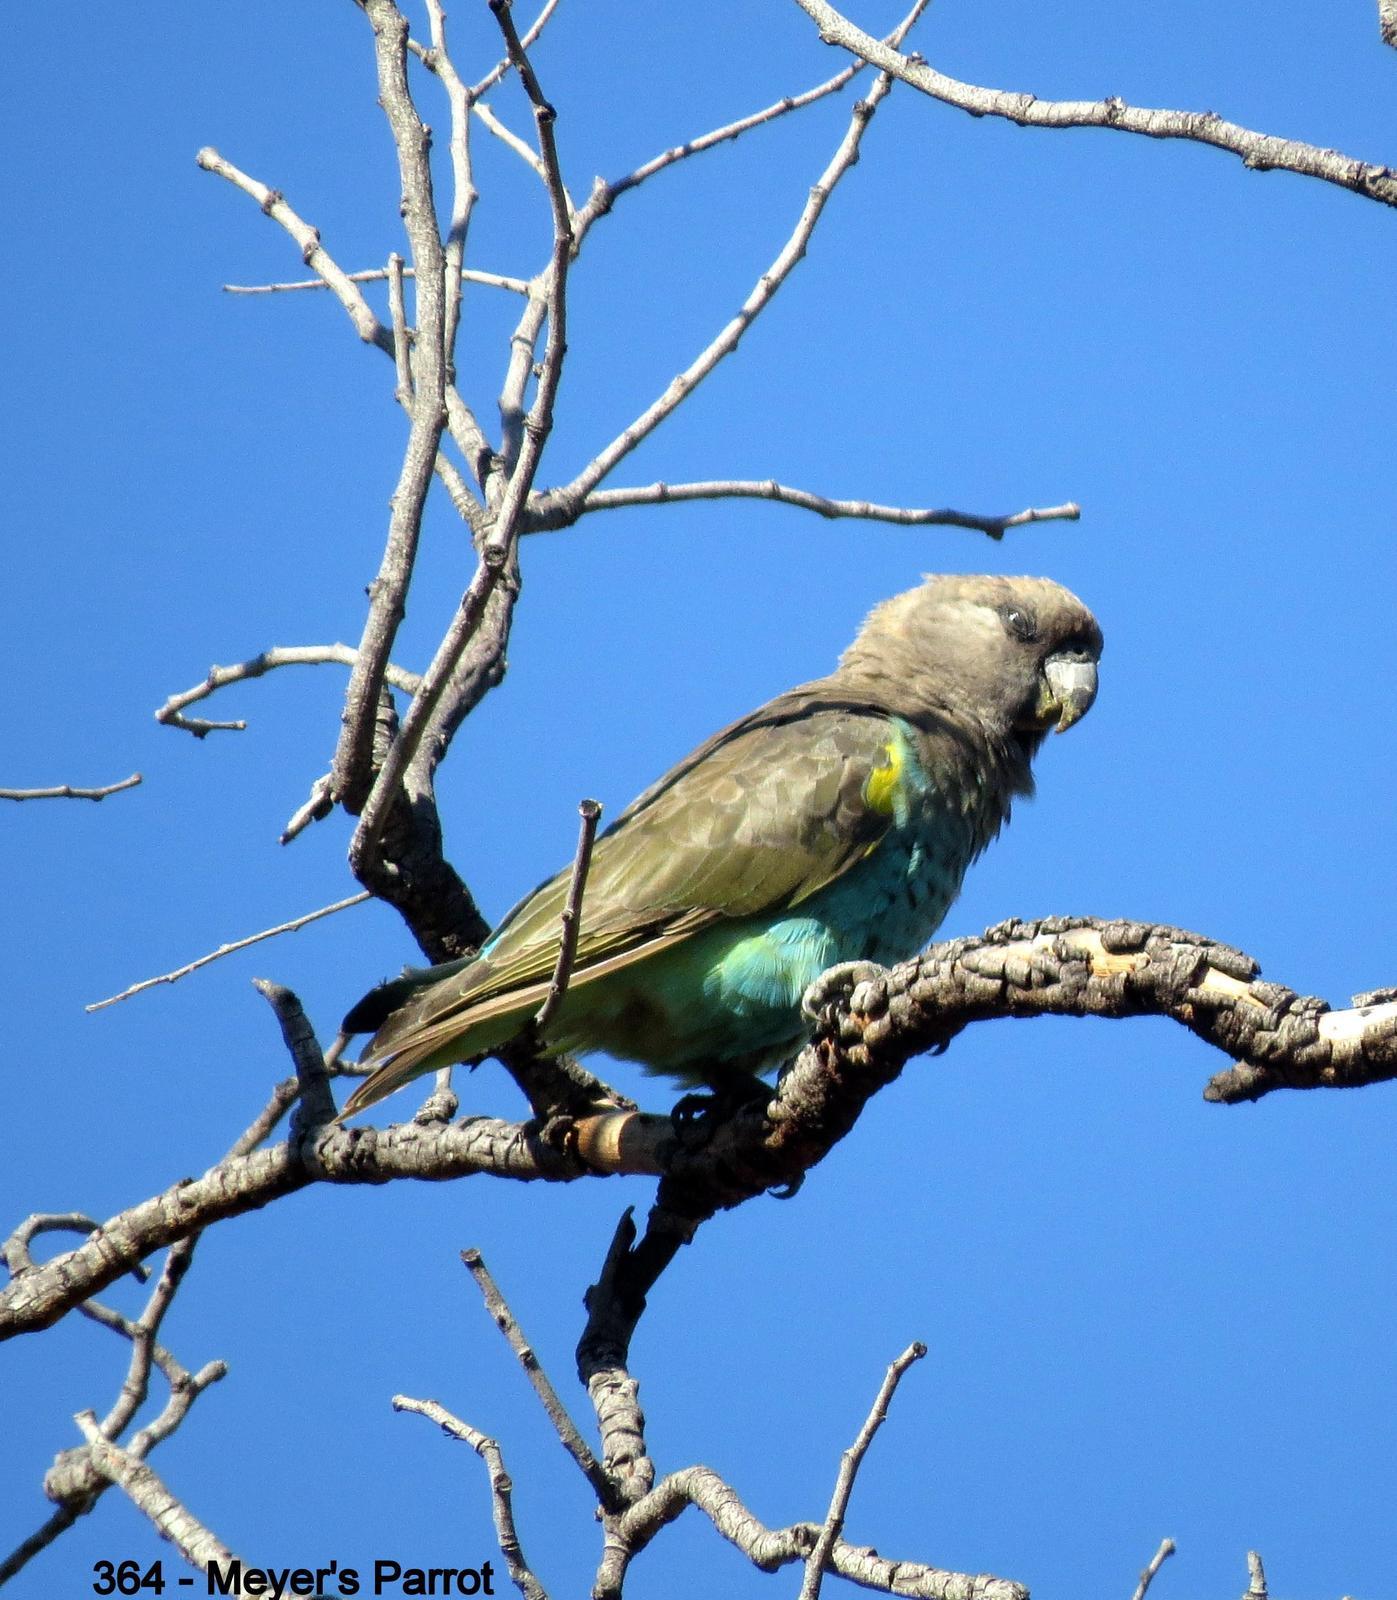 Meyer's Parrot Photo by Richard  Lowe